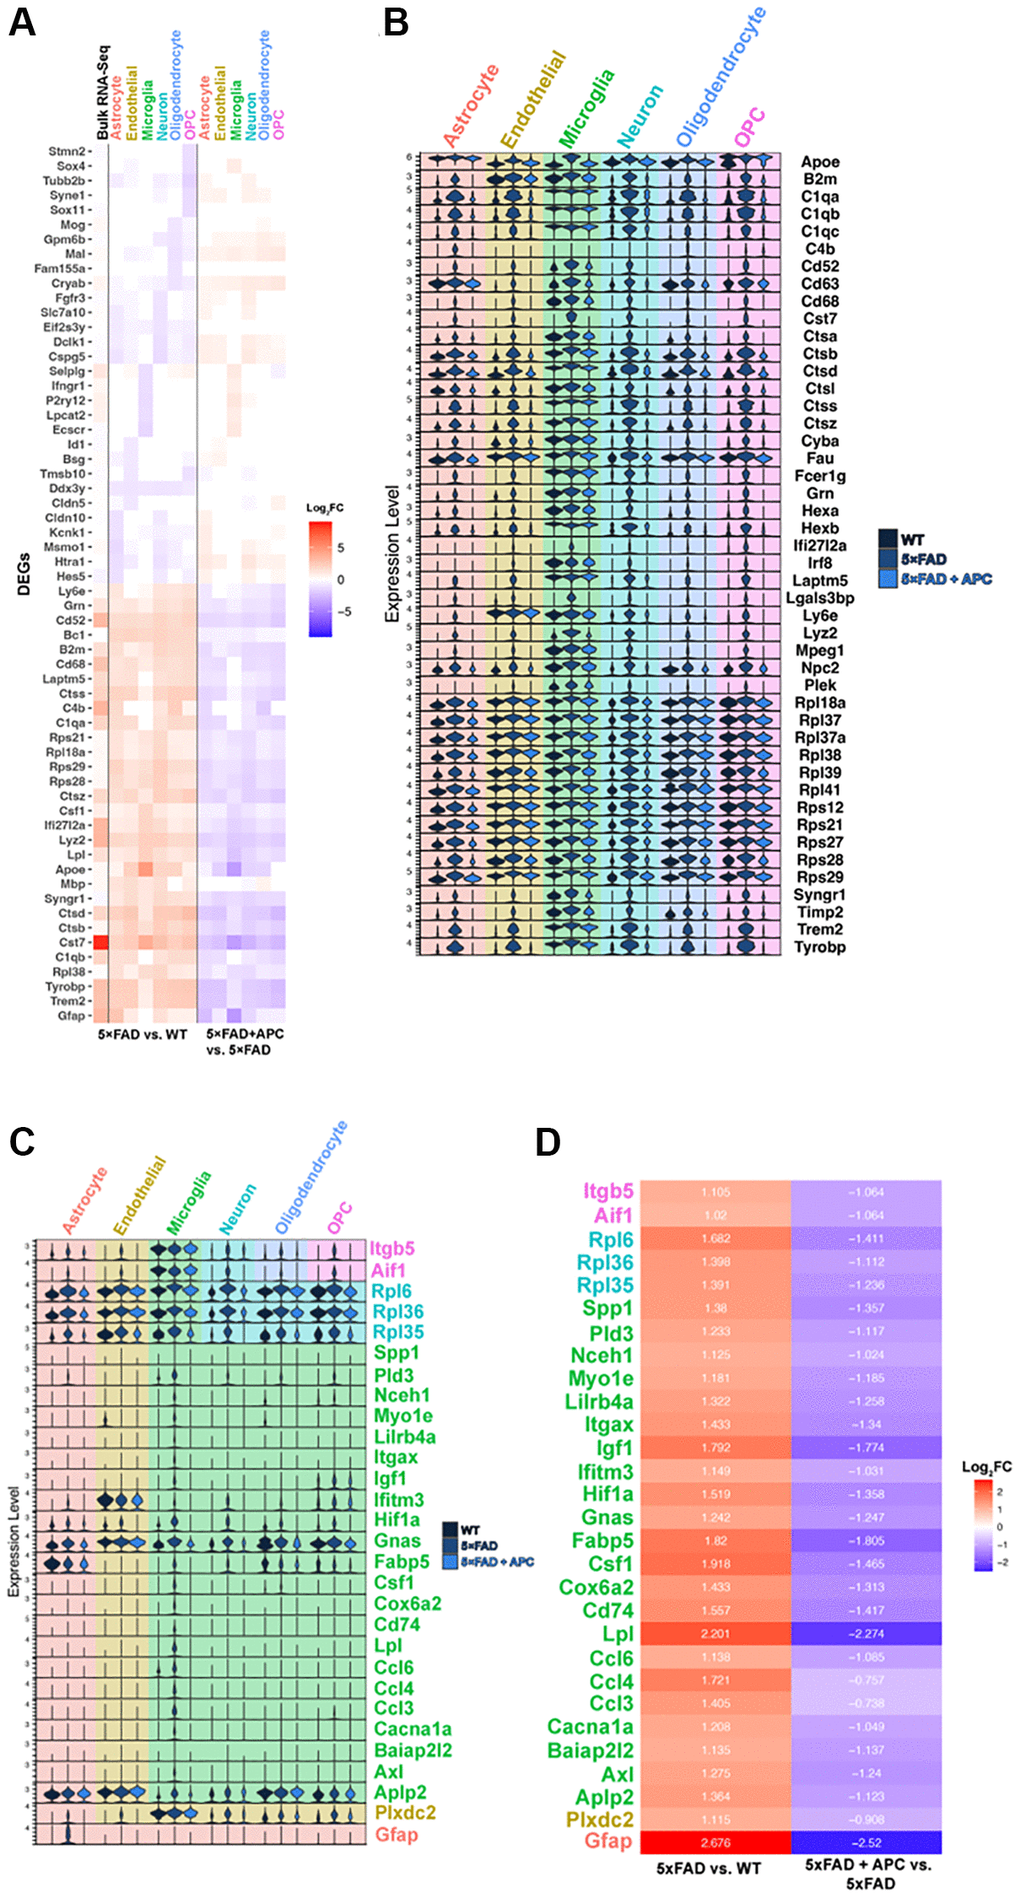 (A) Top 5 most significant DEGs (p-value = 0) per cell type in 5xFAD versus WT (left) and corresponding expression with APC-treatment (right). Bulk RNA-seq shown in column furthest left (6-month 5xFAD vs. WT). (B) Stacked violin plot of the top global DEGs (p-value C) Stacked violin plot of unique DEGS highly differentiated within a particular cell-type. (D) Corresponding heatmap of unique DEGs highly differentiated in a particular cell-type (Figure 2C) plotted with Log2FC value in that cell-type. 5xFAD versus WT (left), 5xFAD + APC versus 5xFAD (right).